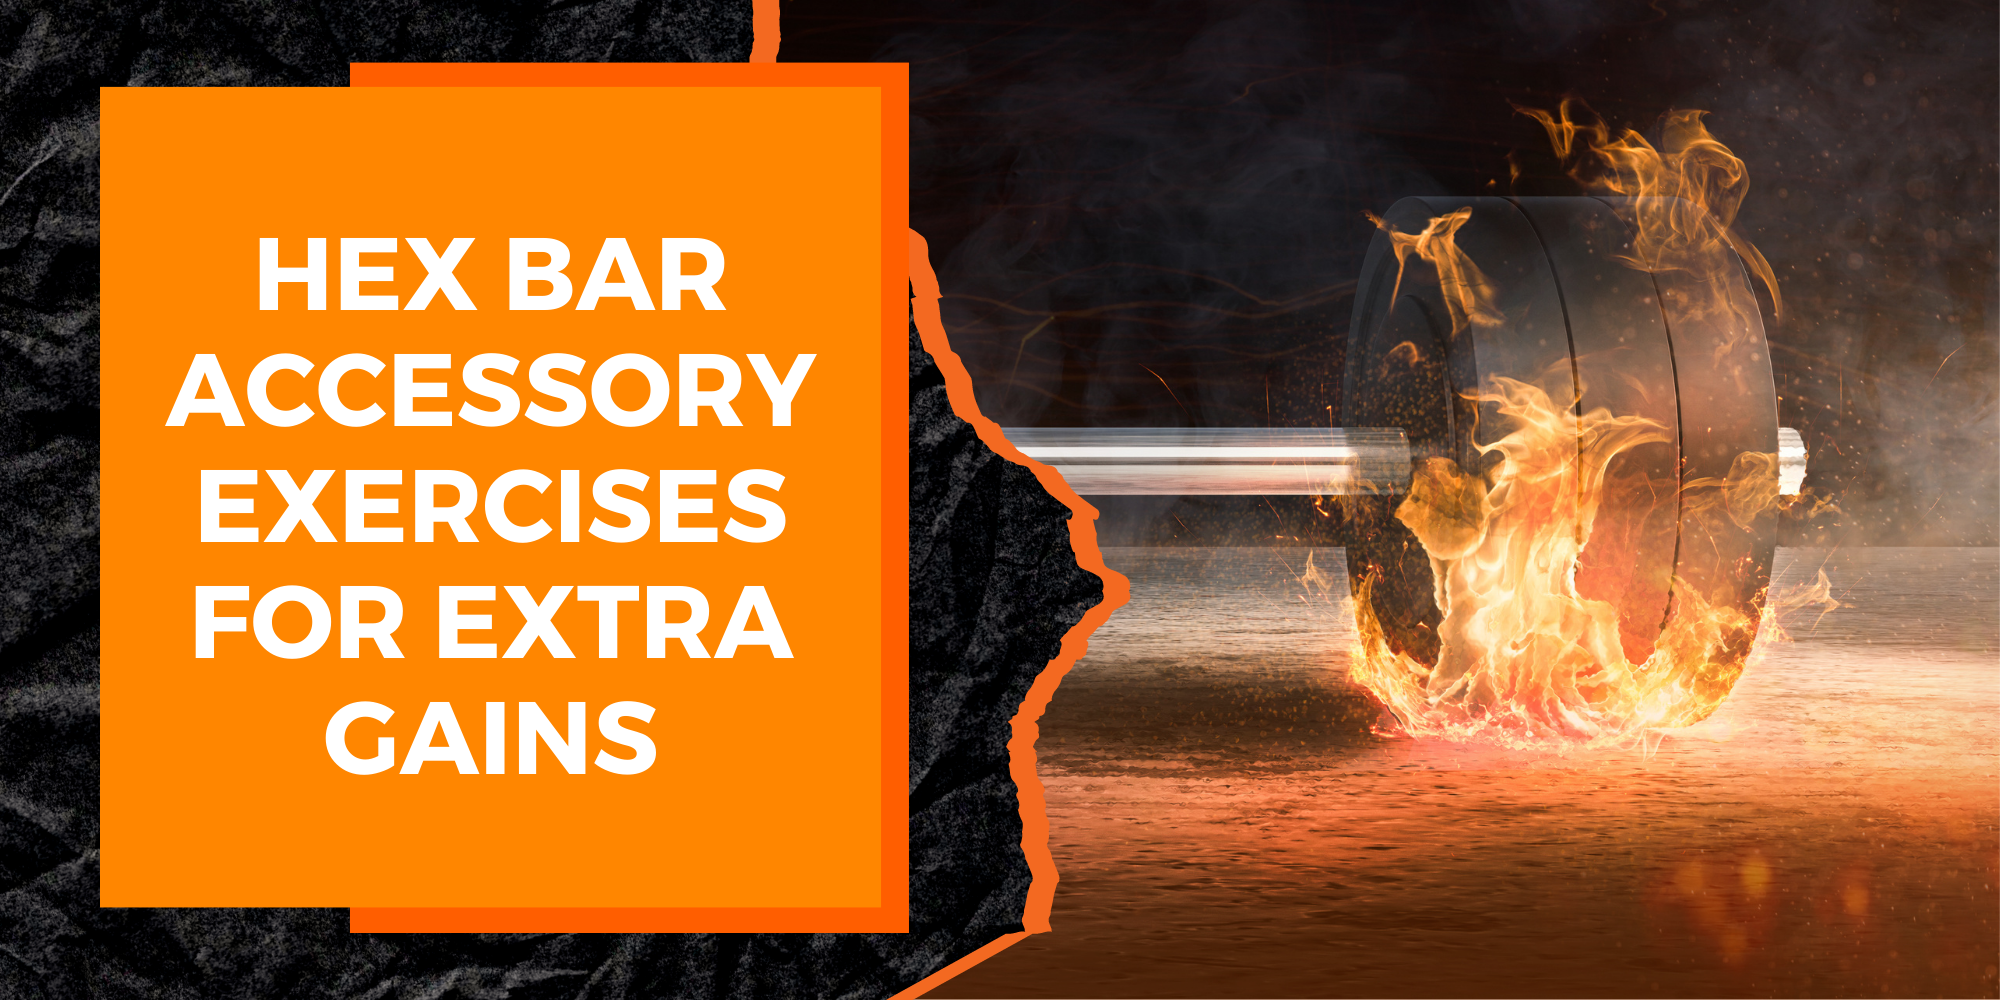 Hex Bar Accessory Exercises for Extra Gains